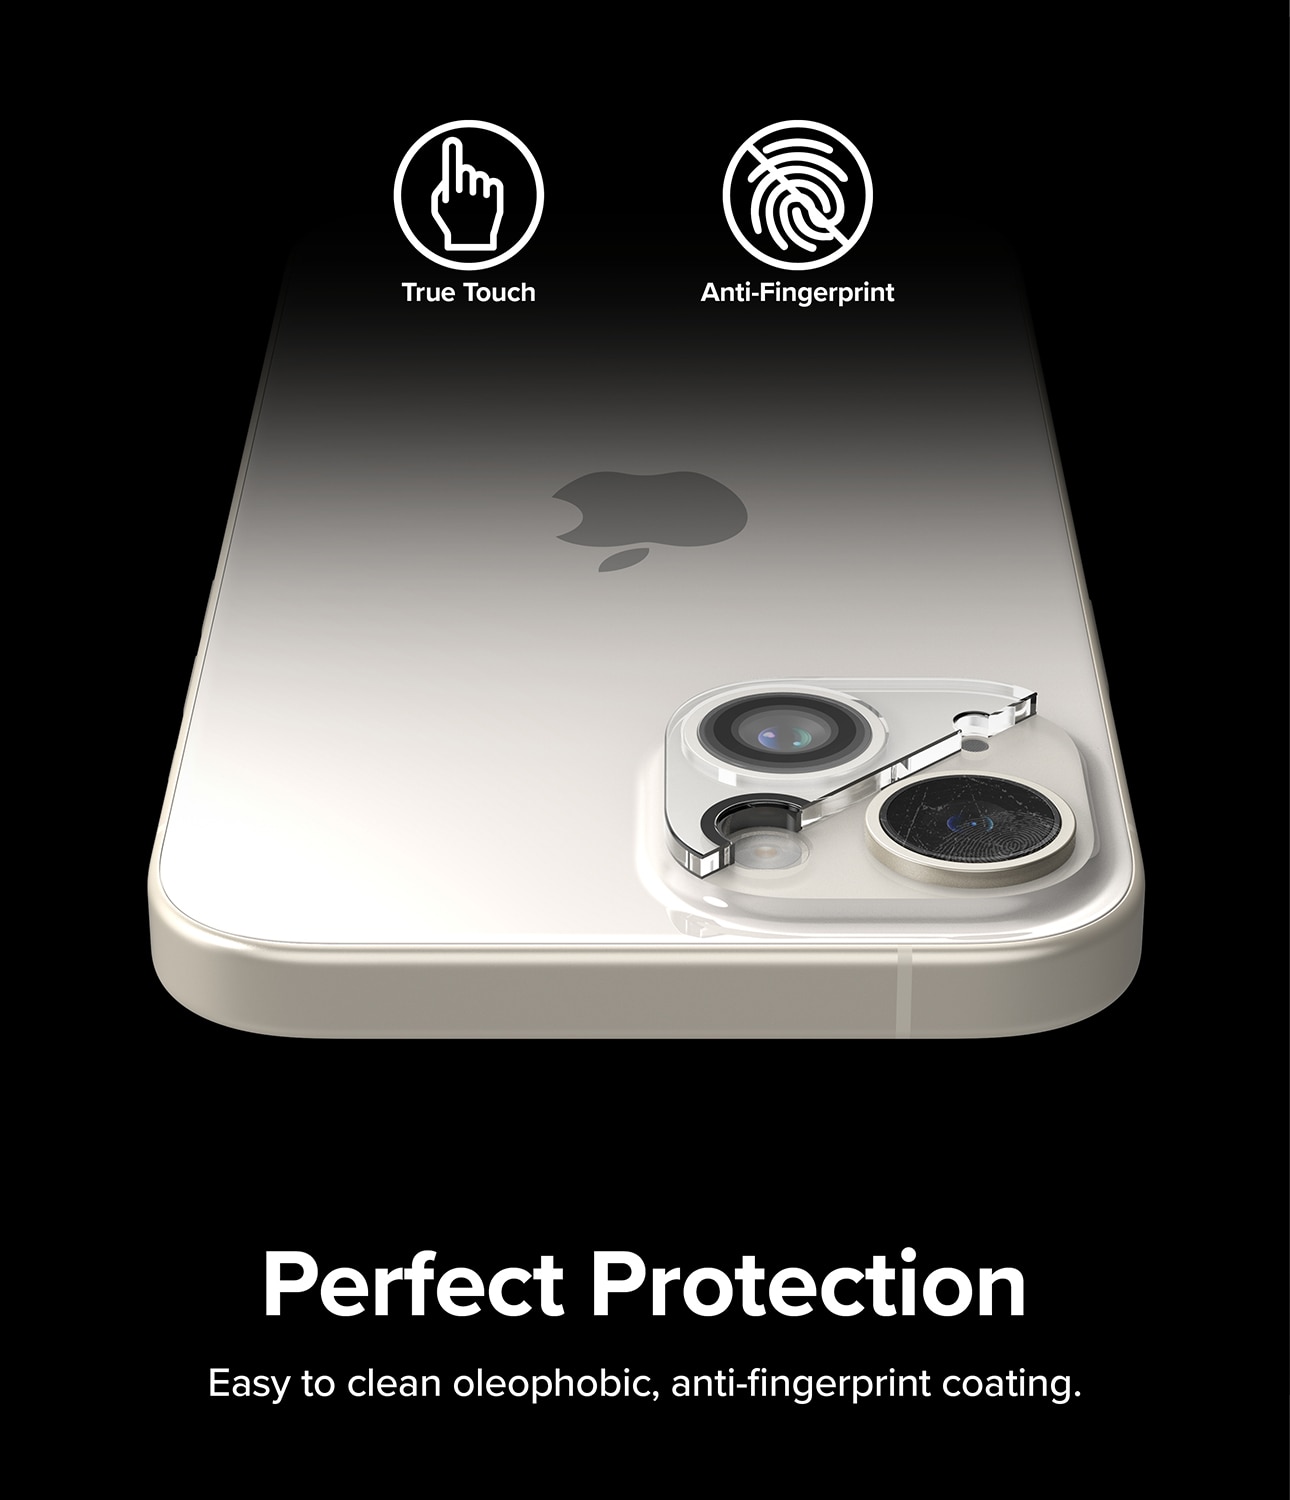 iPhone 15 Camera Protector Glass (2-pack) Transparent